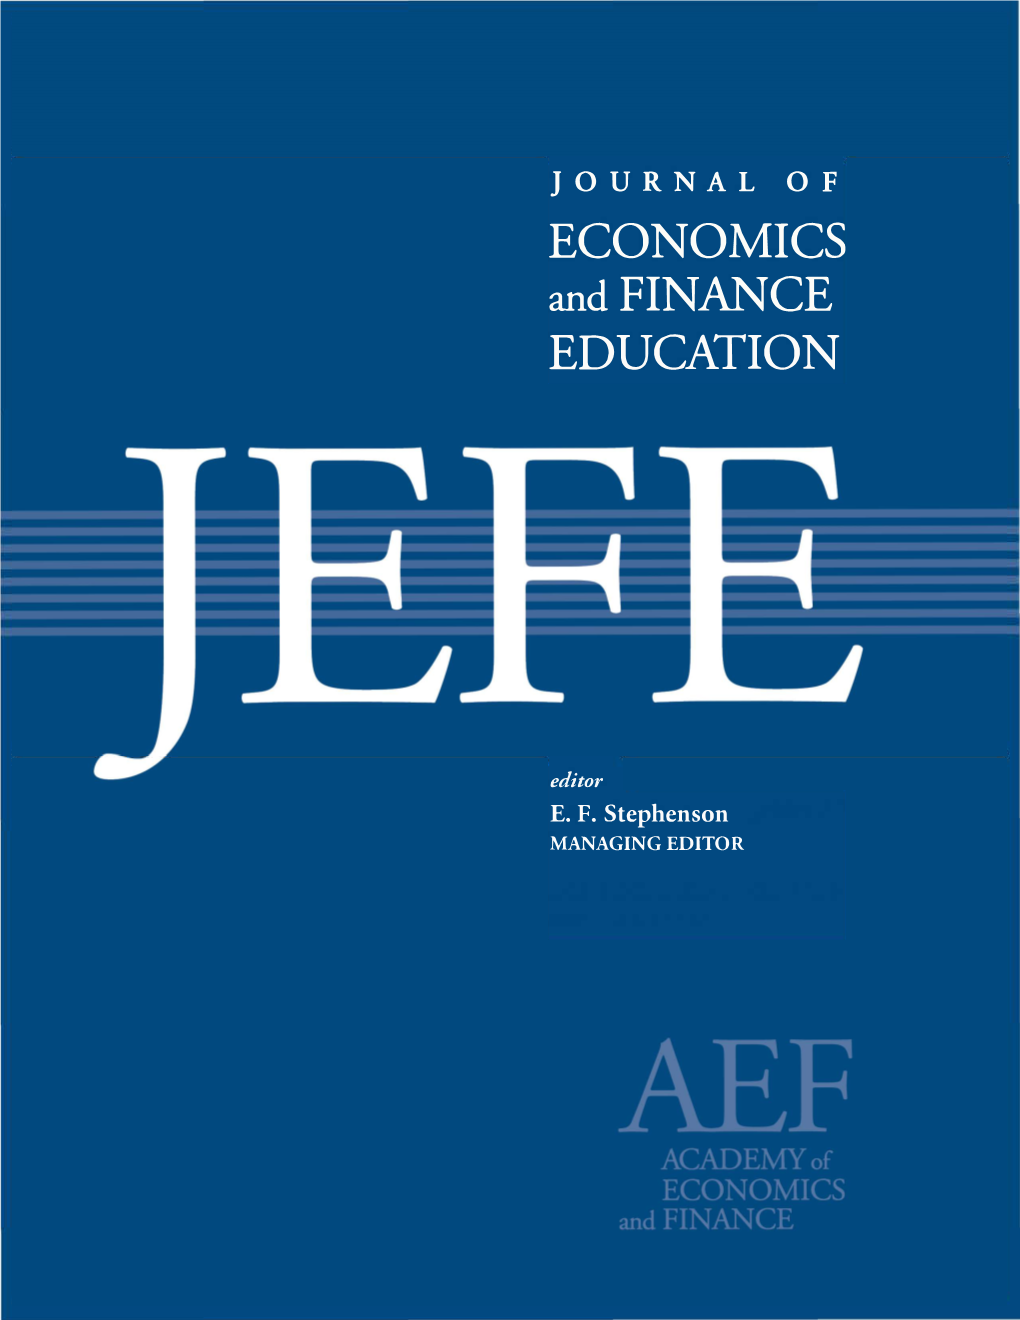 ECONOMICS and FINANCE EDUCATION ∙ Volume 18 ∙ Number 1 ∙ Summer 2019